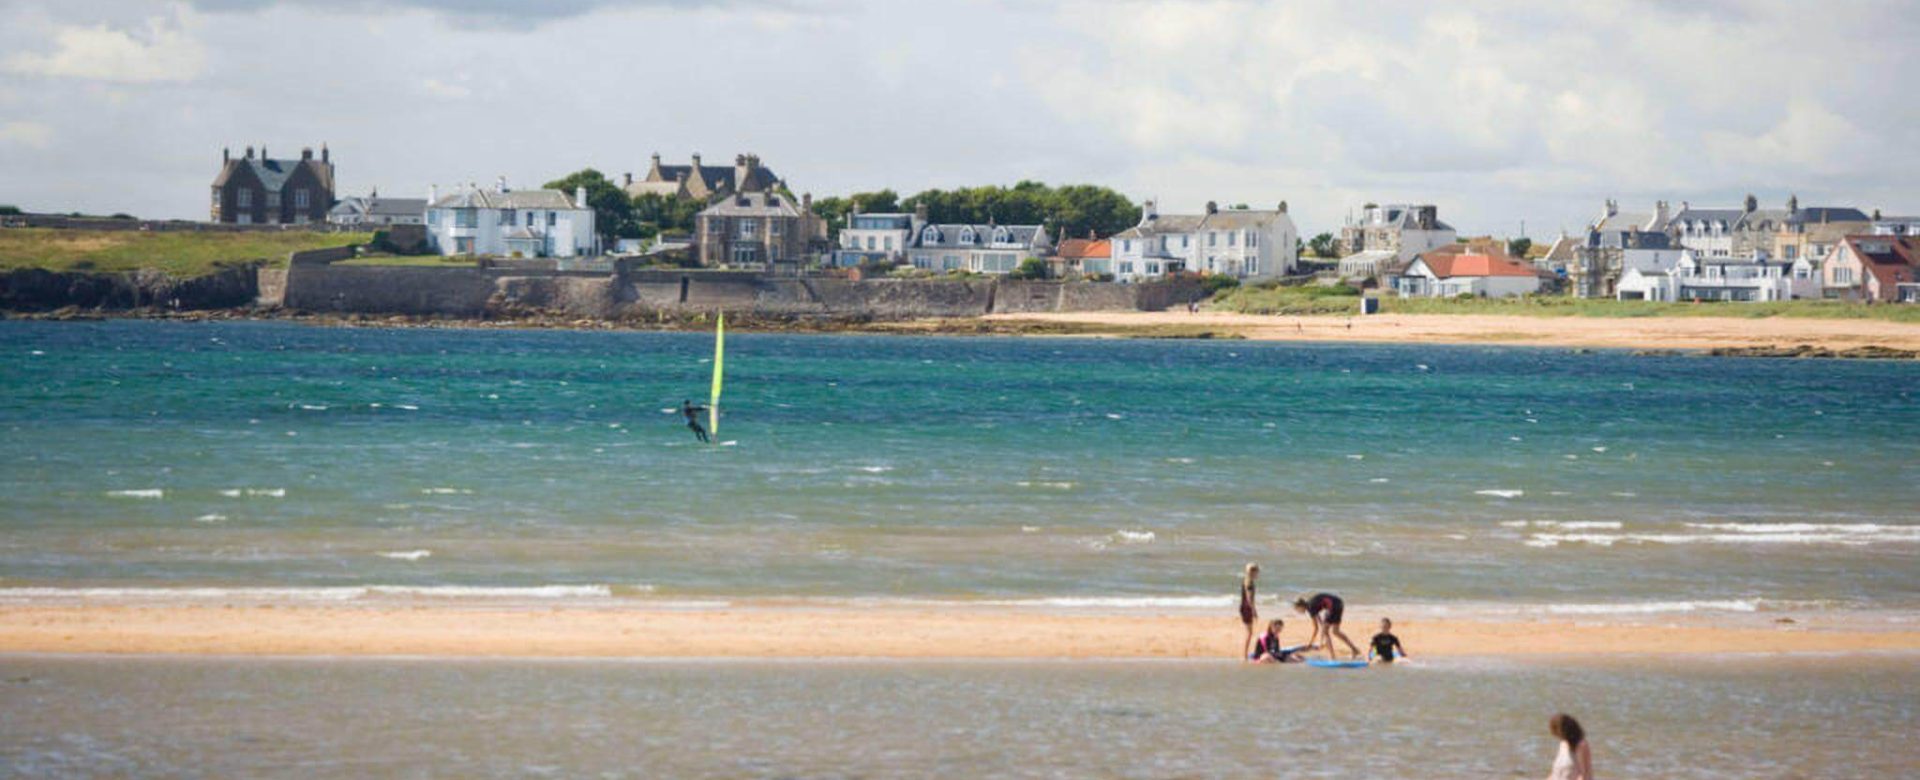 Elie holiday lettings